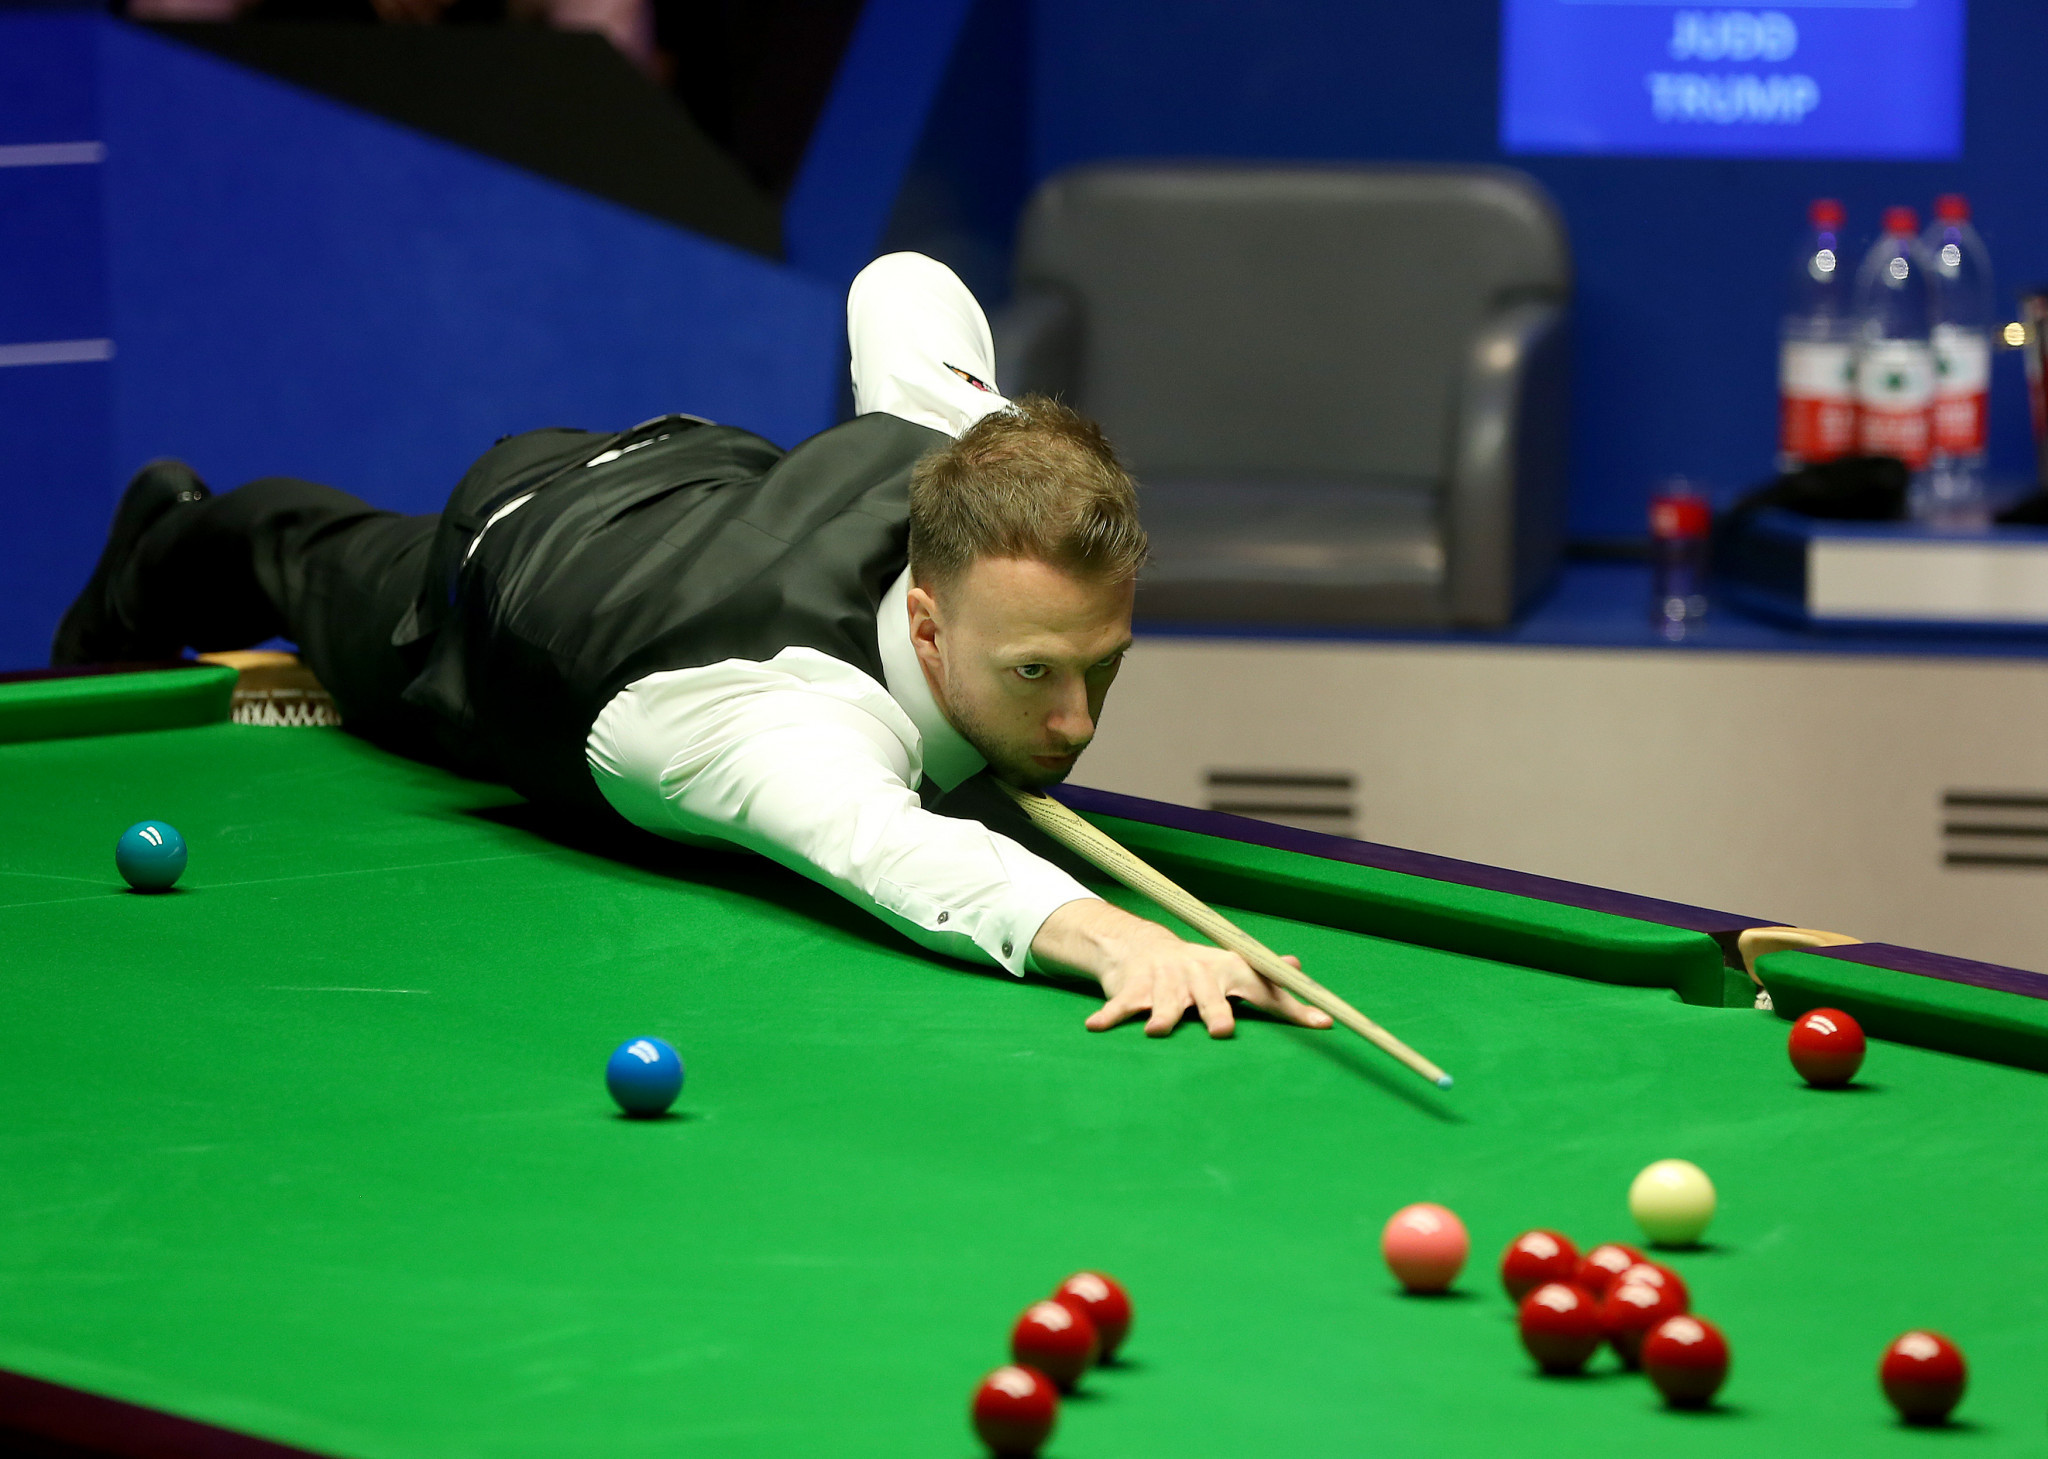 Top two seeds both trail after first day of World Snooker Championship quarter-finals